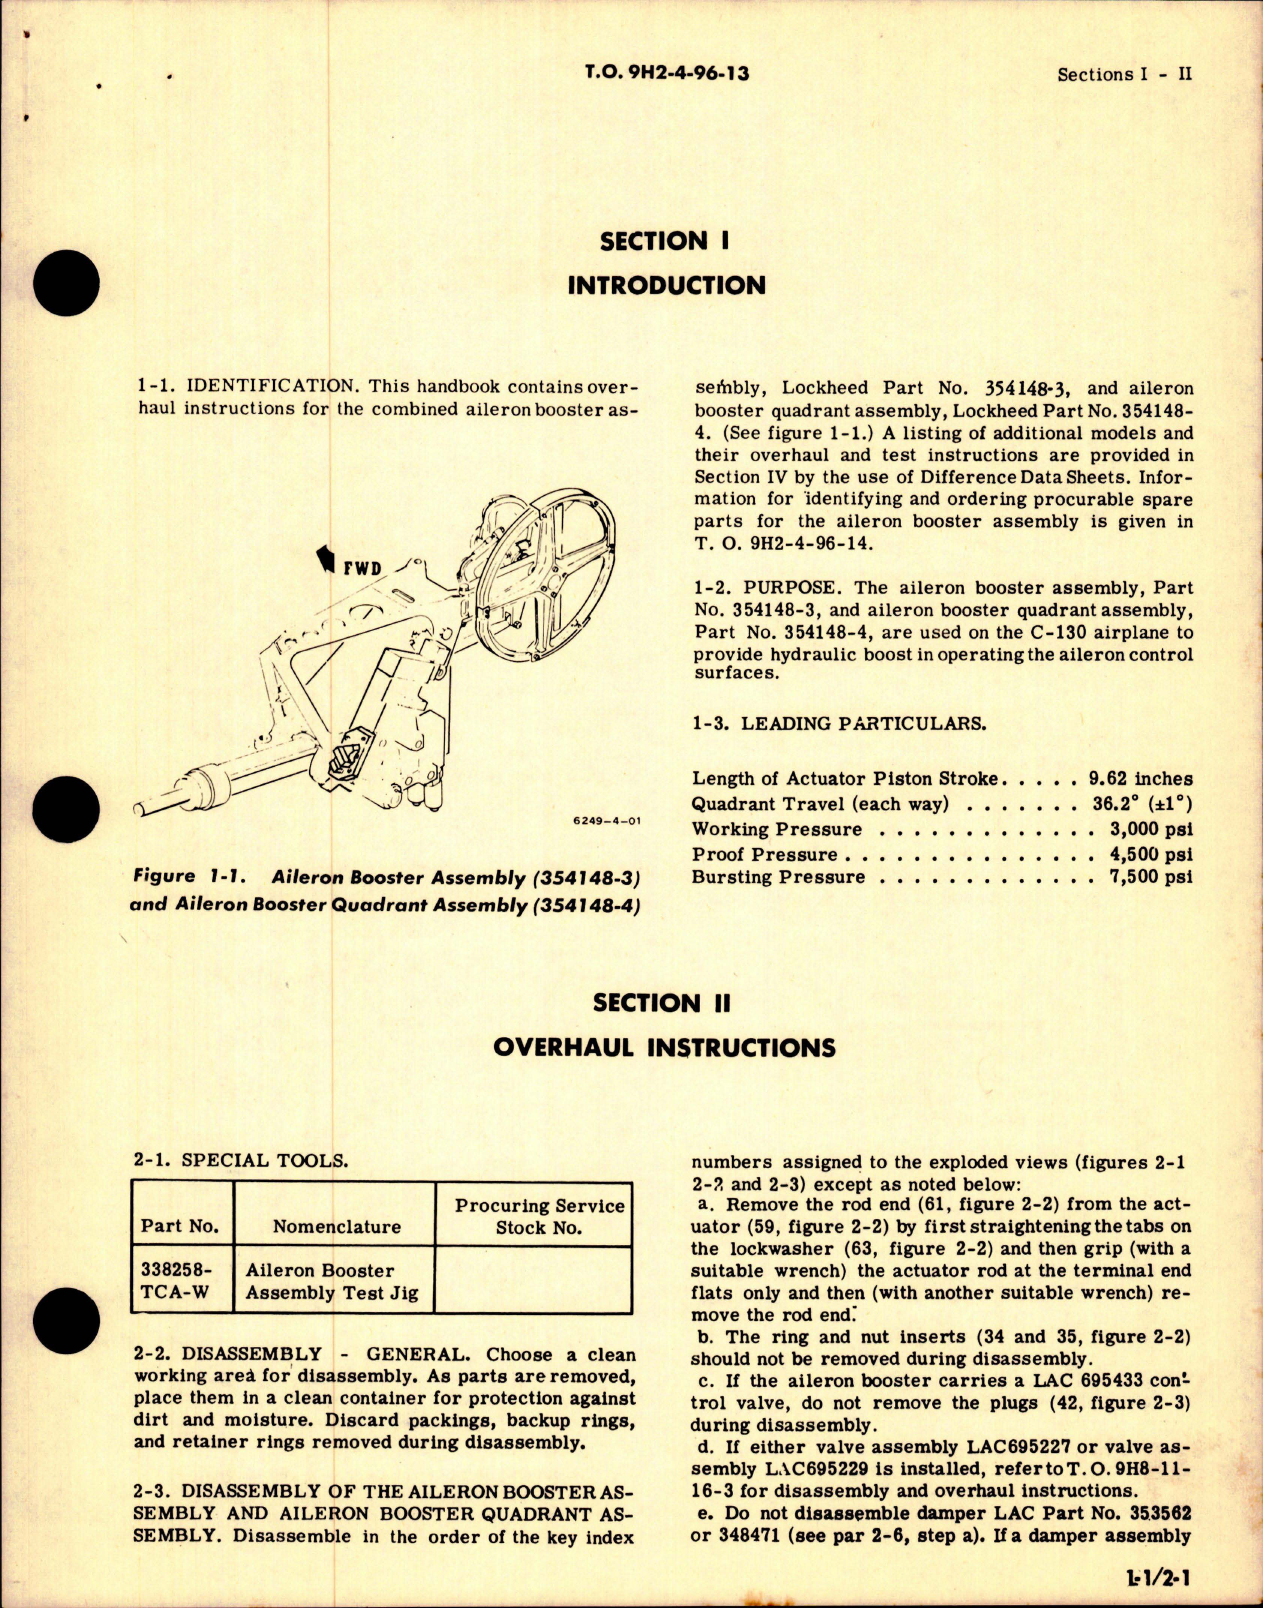 Sample page 5 from AirCorps Library document: Overhaul Instructions for Aileron Booster Assembly and Aileron Booster Quadrant Assembly